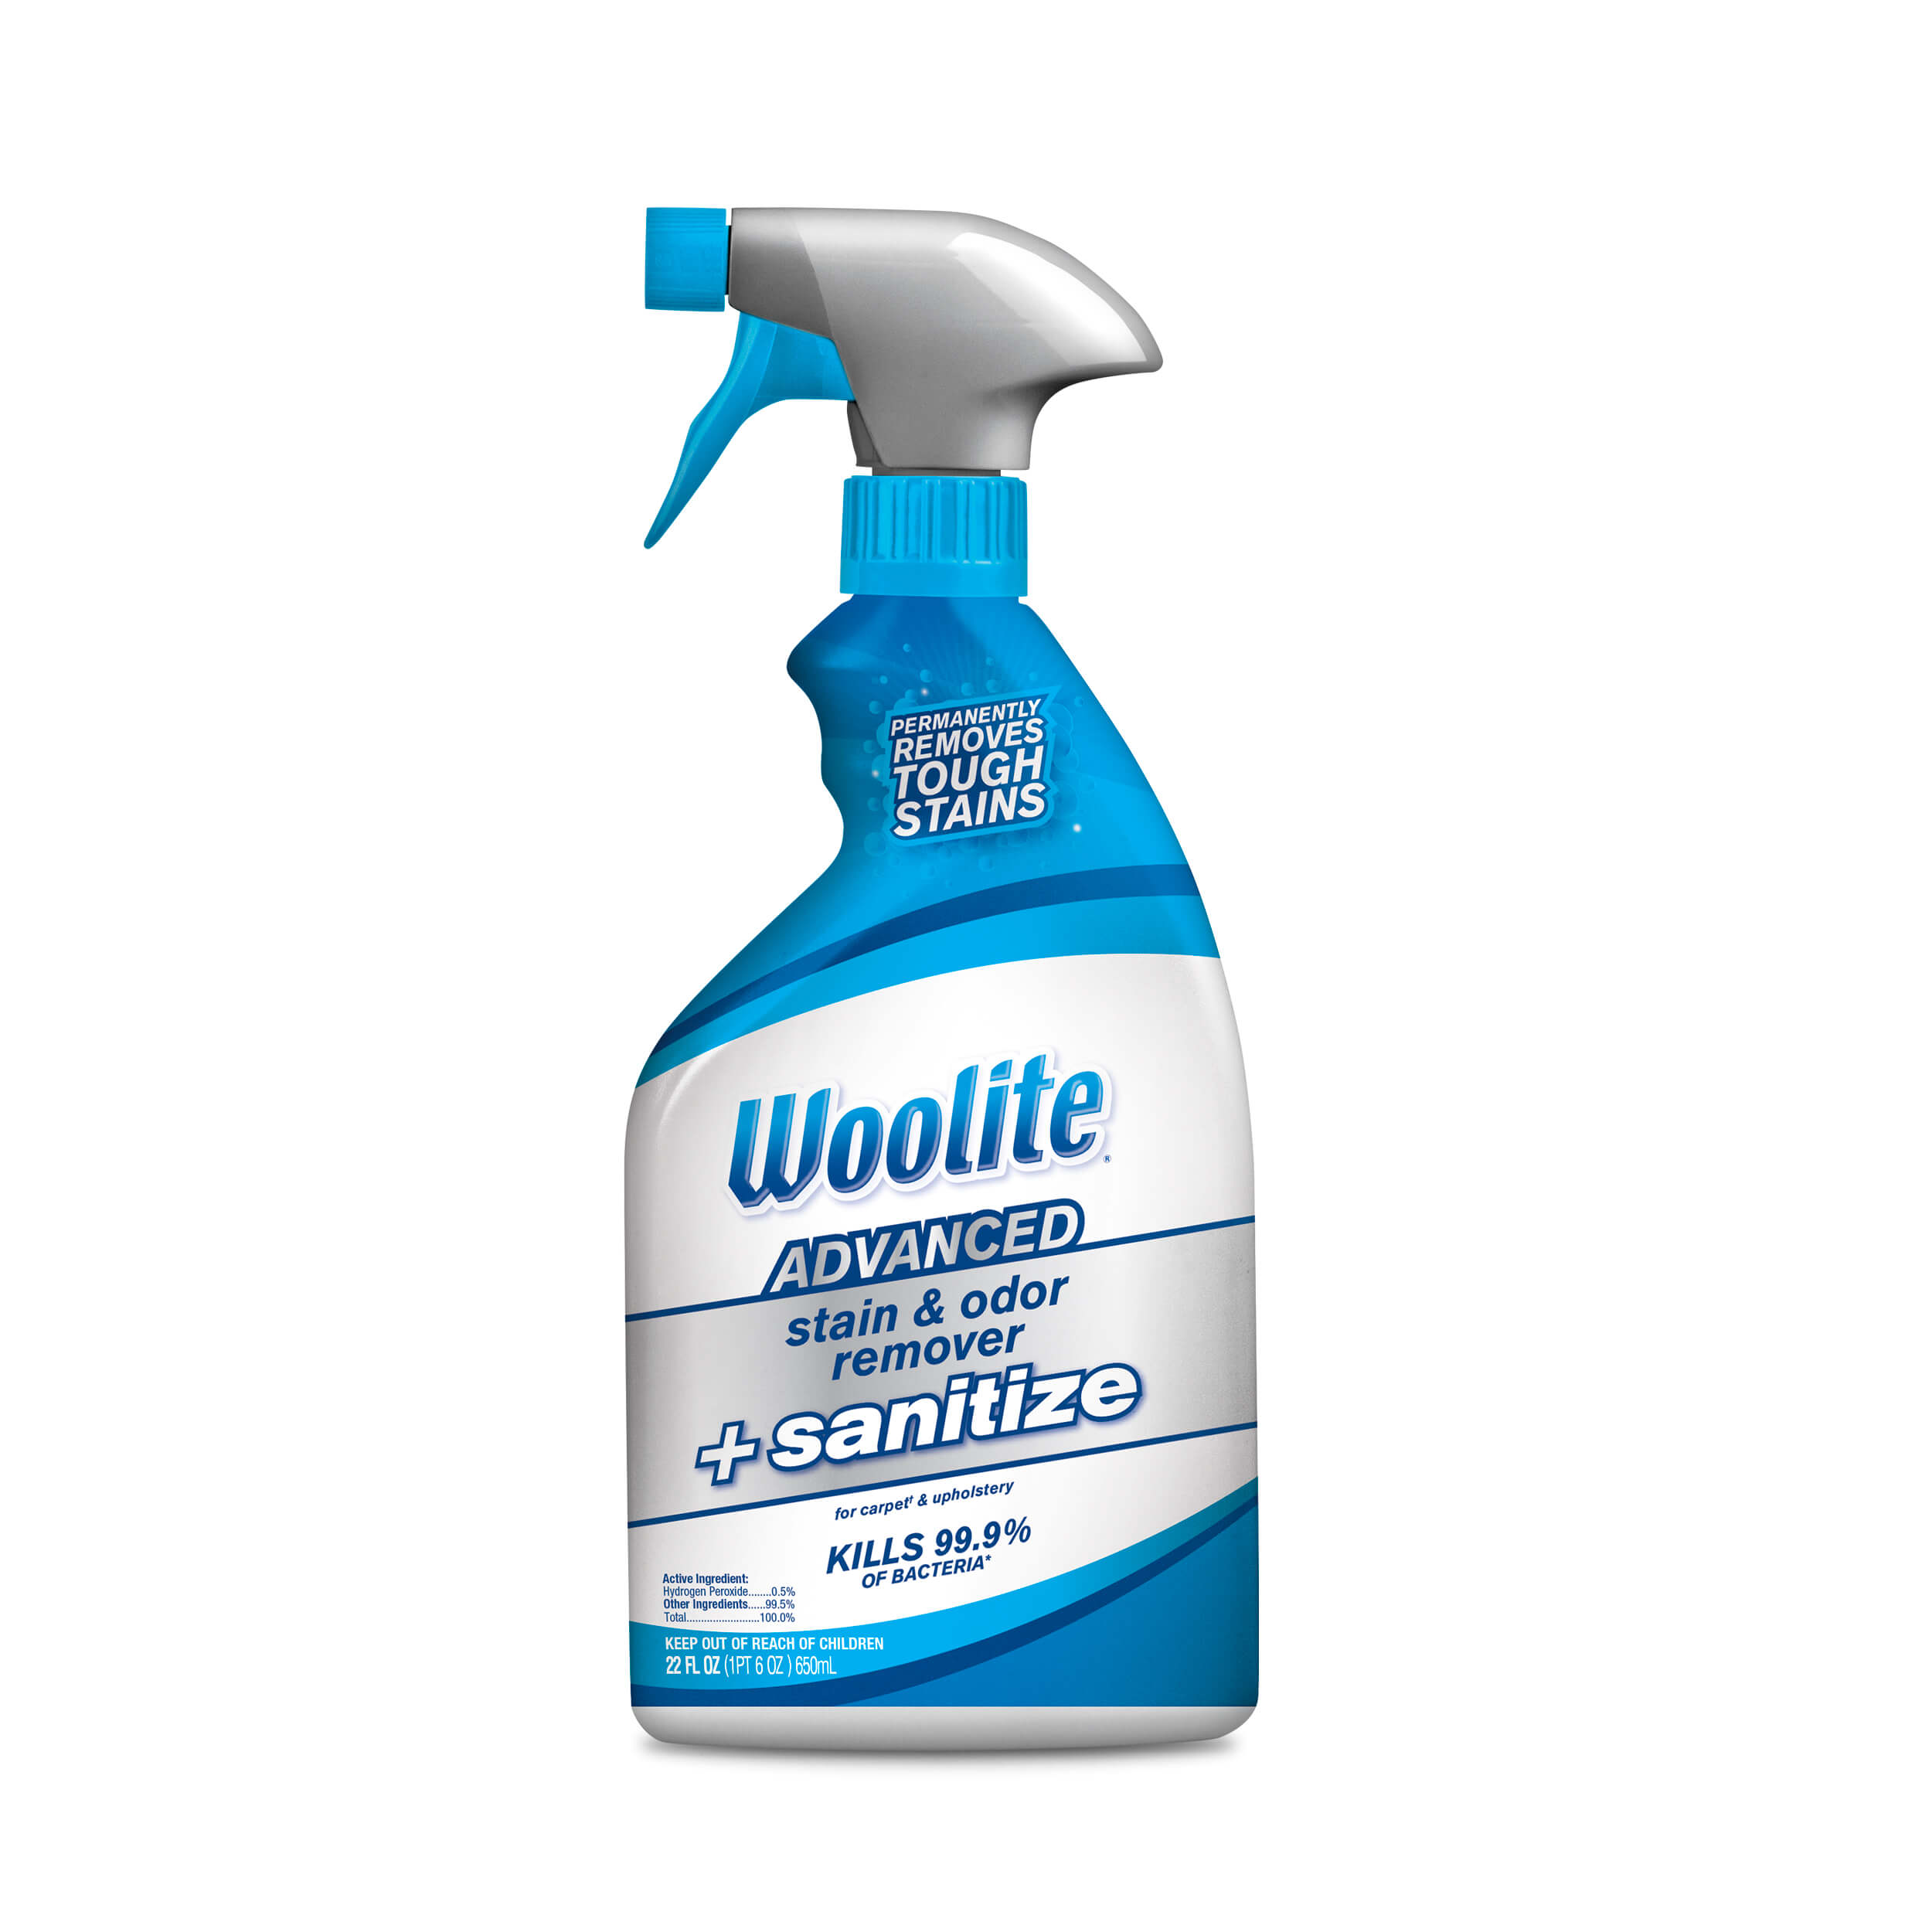 Advanced Stain Odor Remover Sanitize Woolite Cleaner